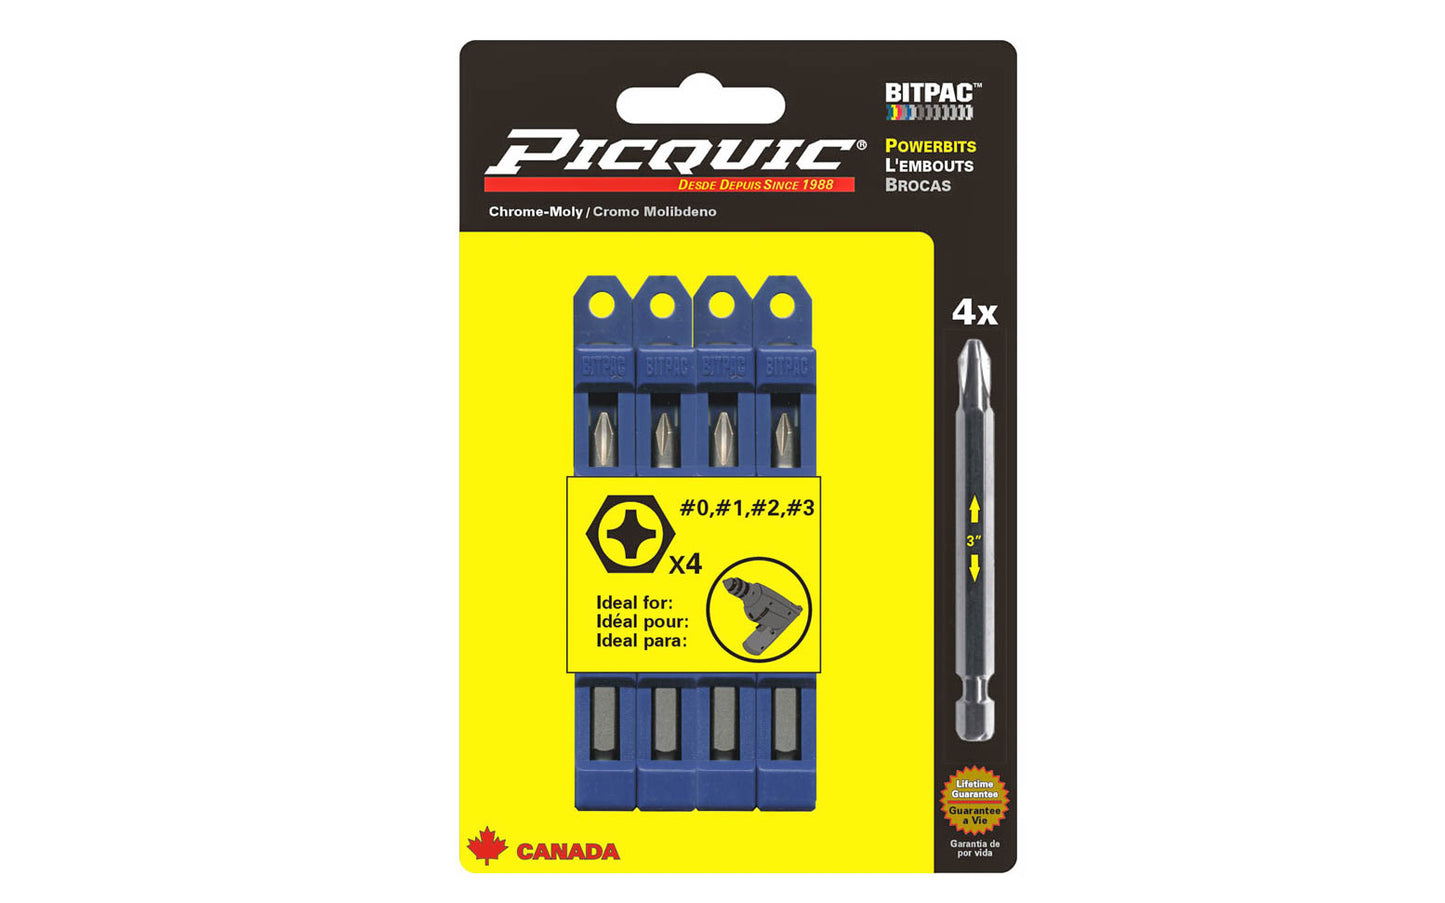 Picquic 4-piece Phillips Powerbit Set with sizes #0, #1, #2, #3 phillips drive bits. Replacement bits for Picquic screwdrivers & also good for use in drills & impact drivers. 1/4” hex ball power shank. 057369950064